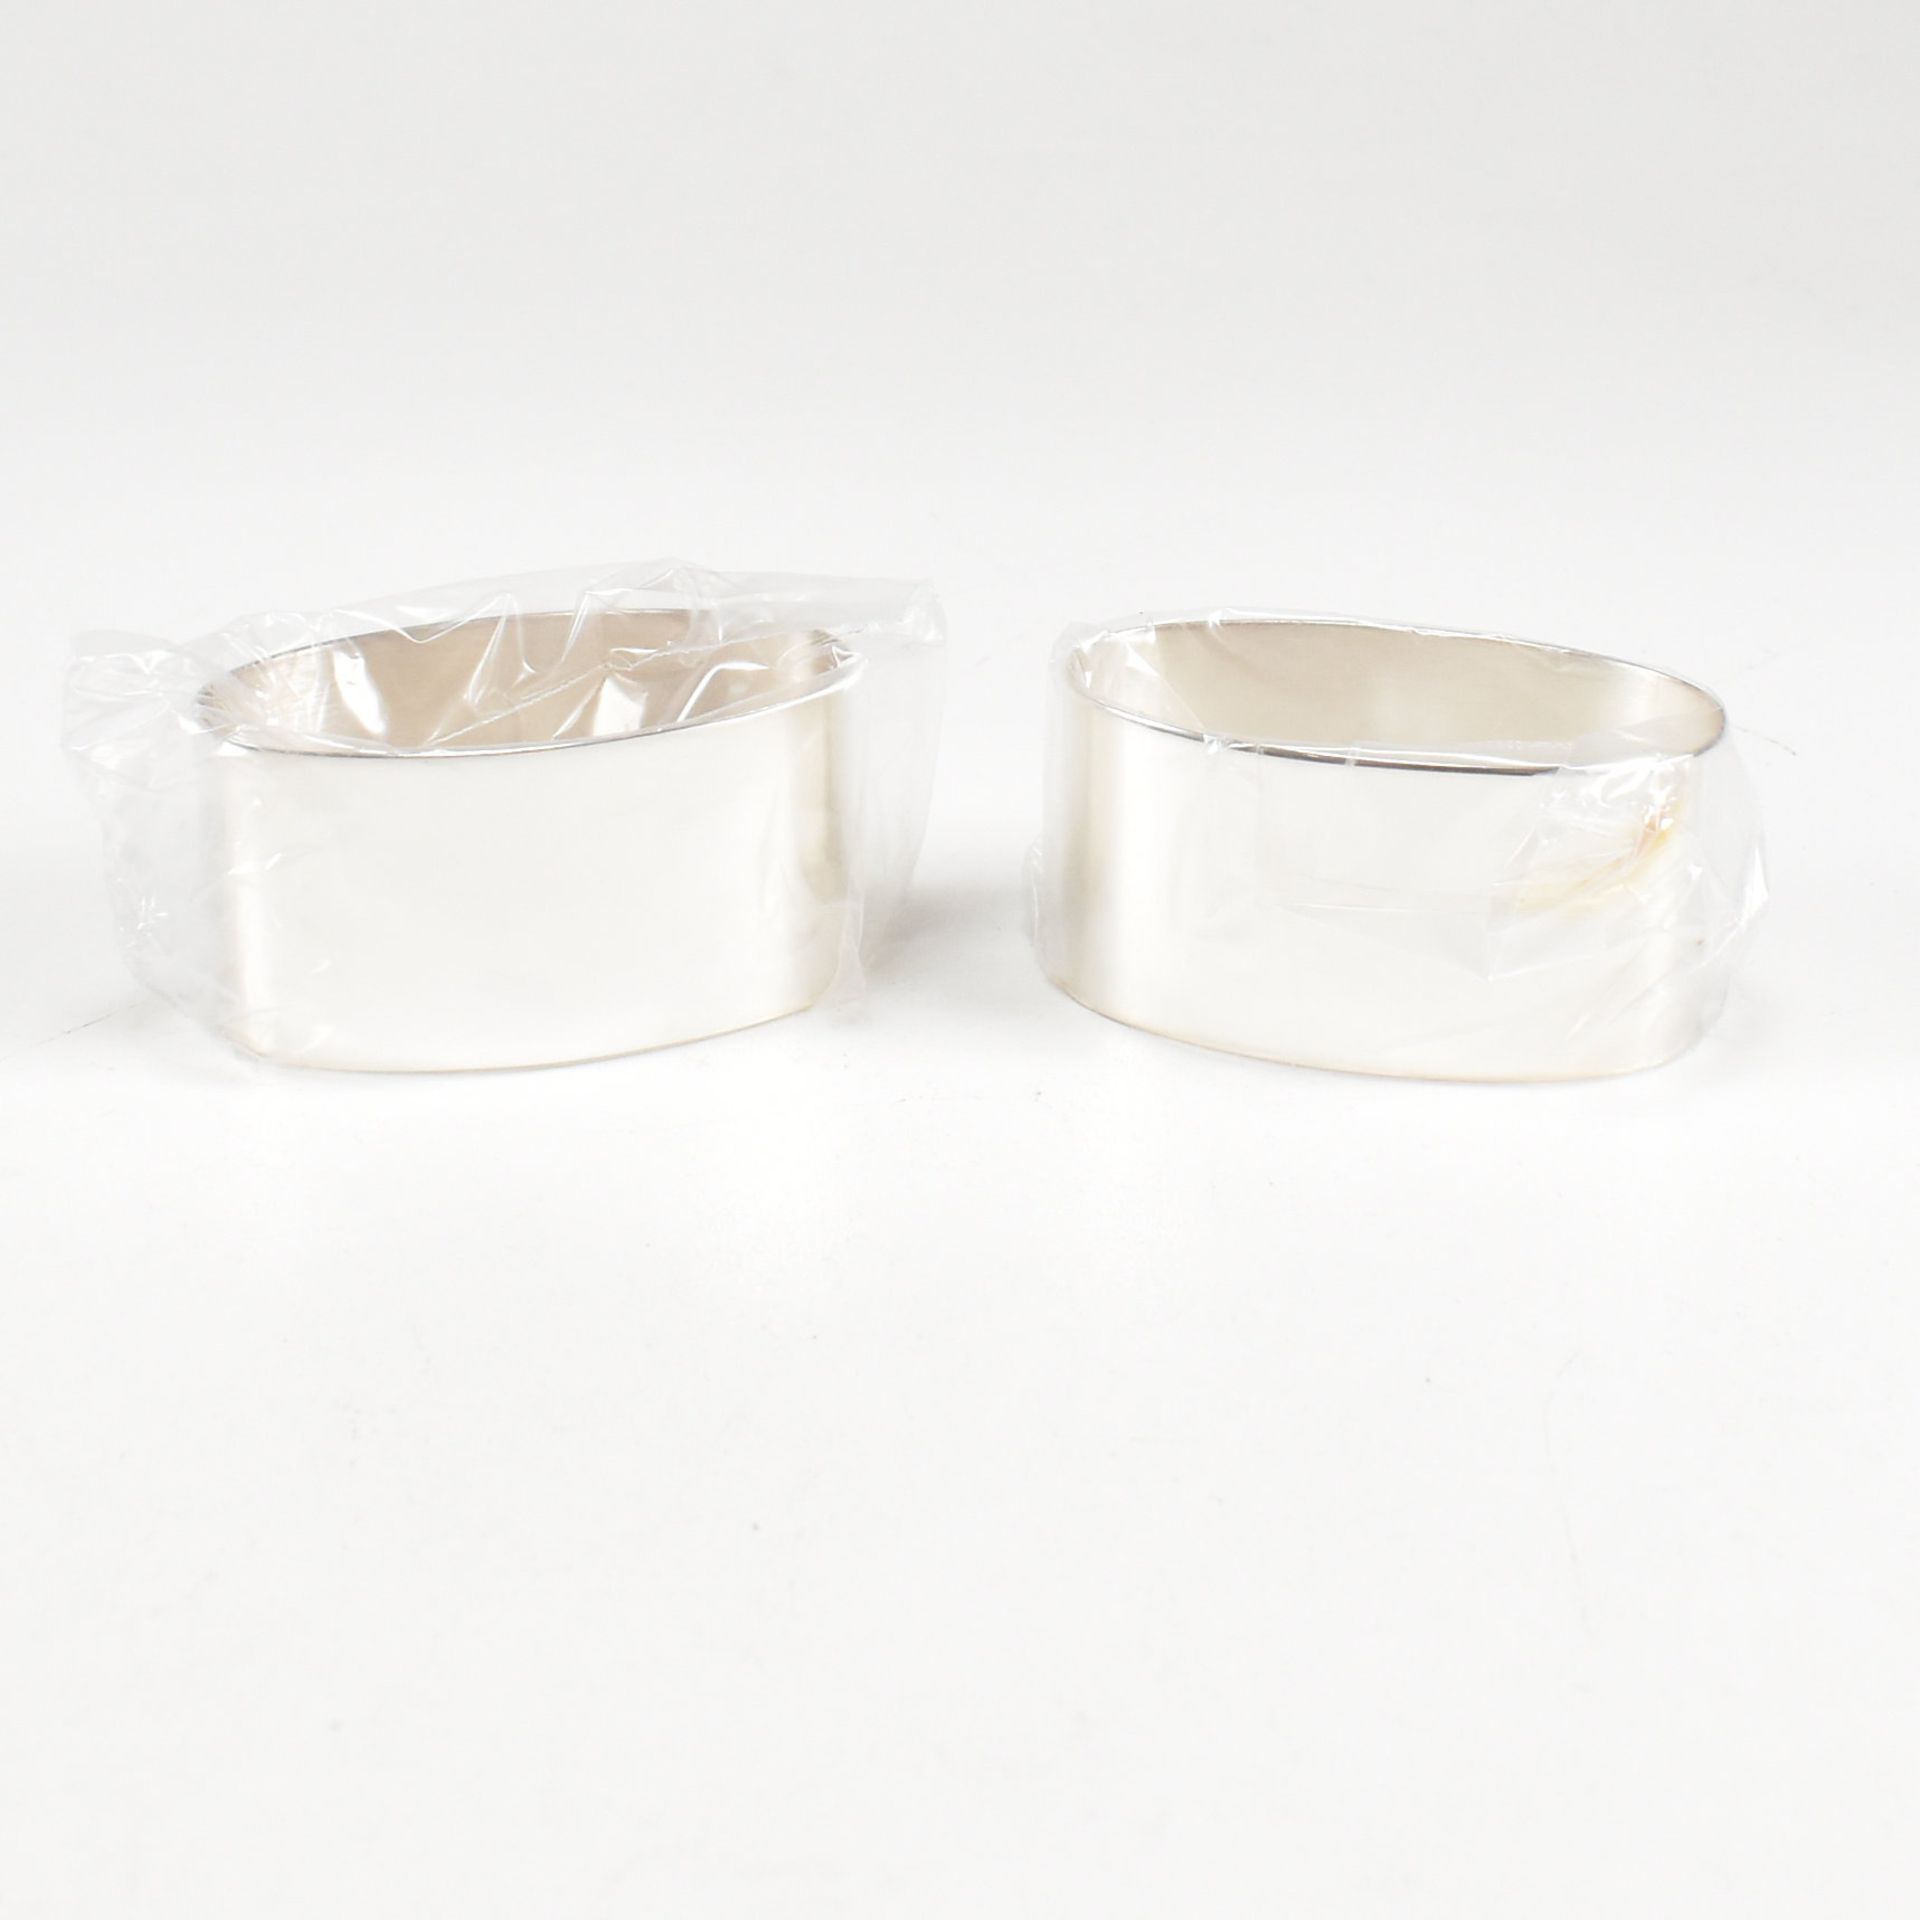 1990S CASED PAIR OF NAPKIN RINGS - Image 4 of 11